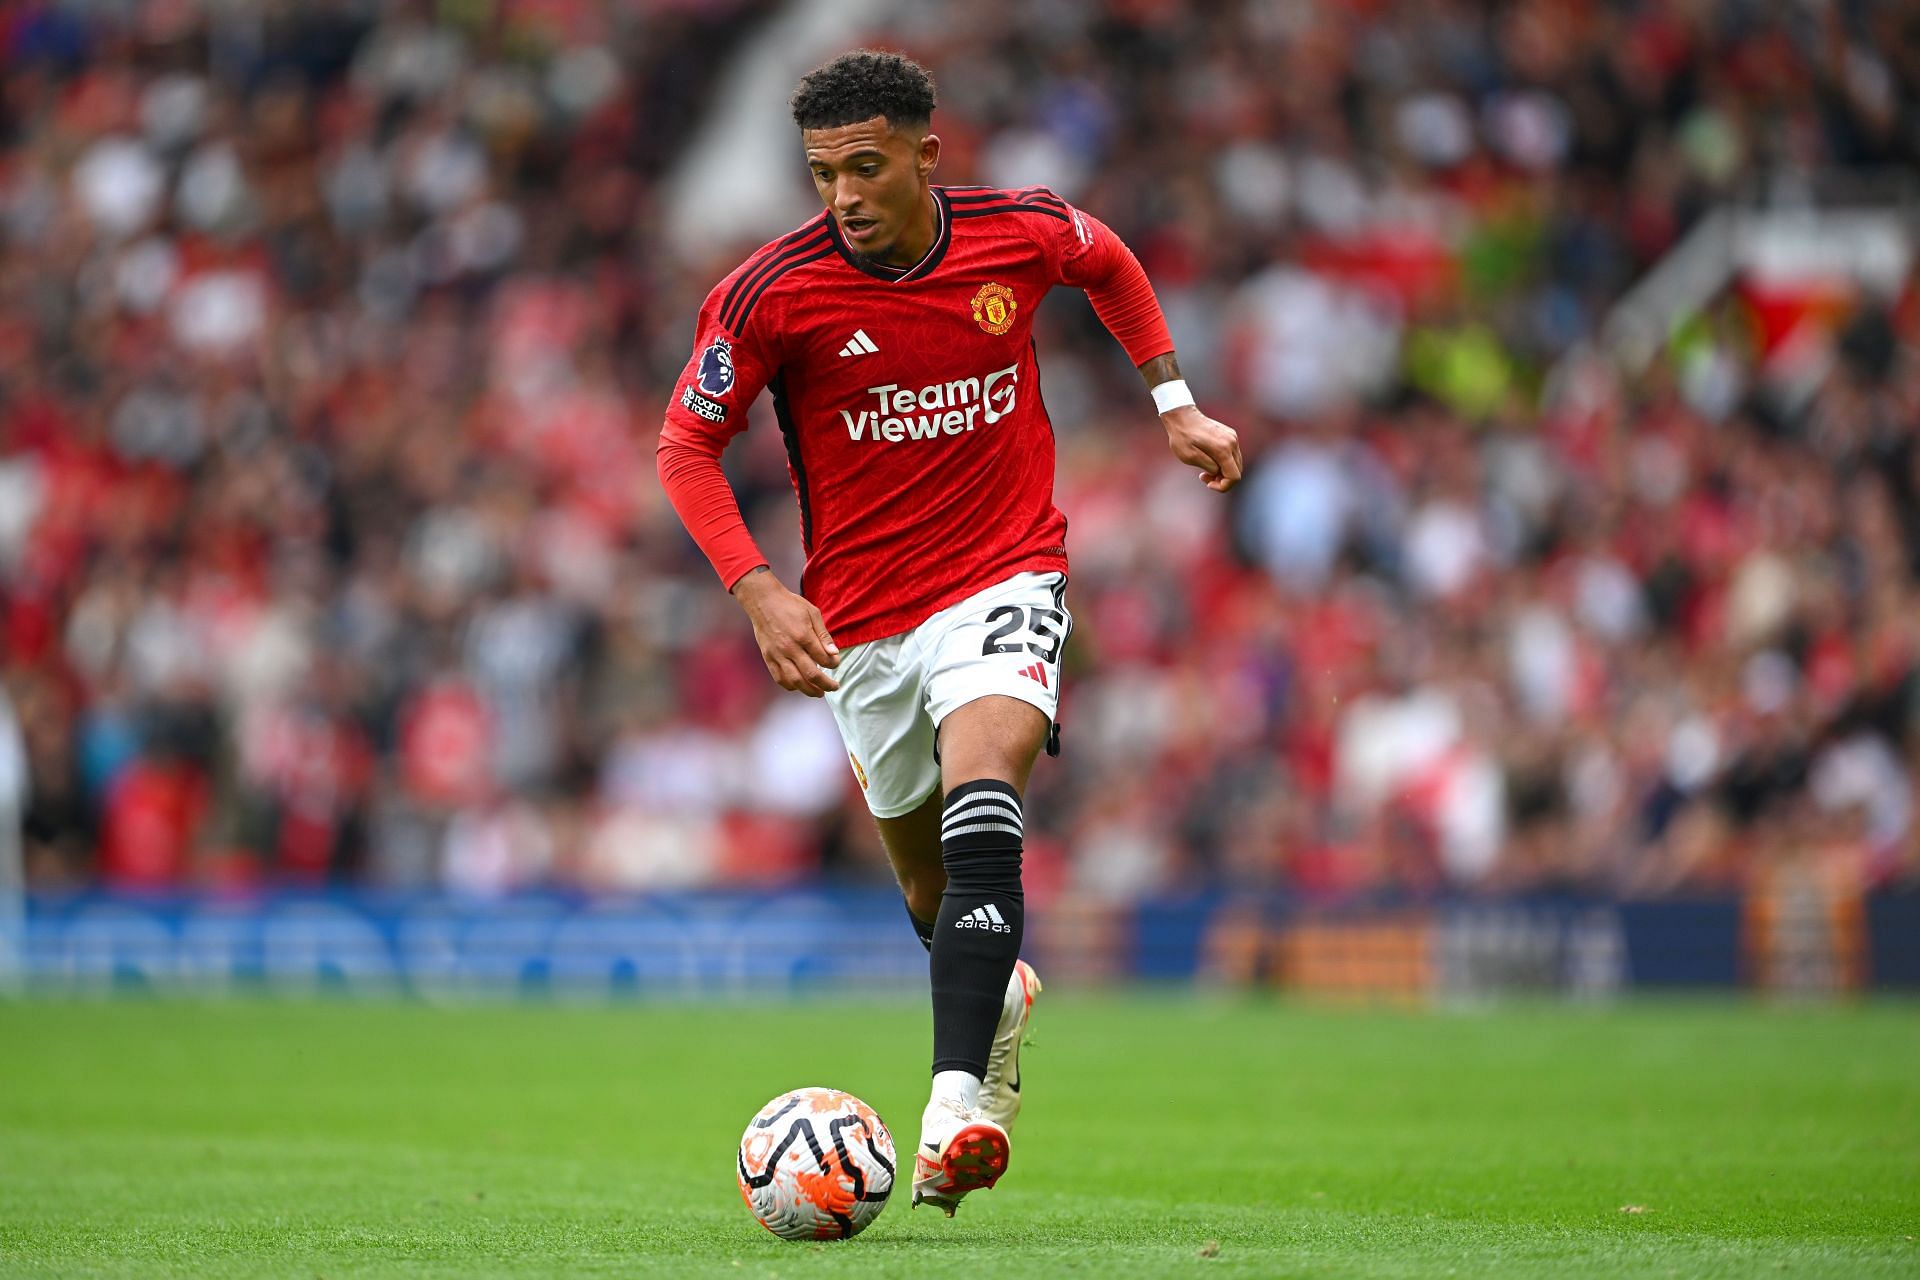 Jadon Sancho is expected to leave Old Trafford in January.